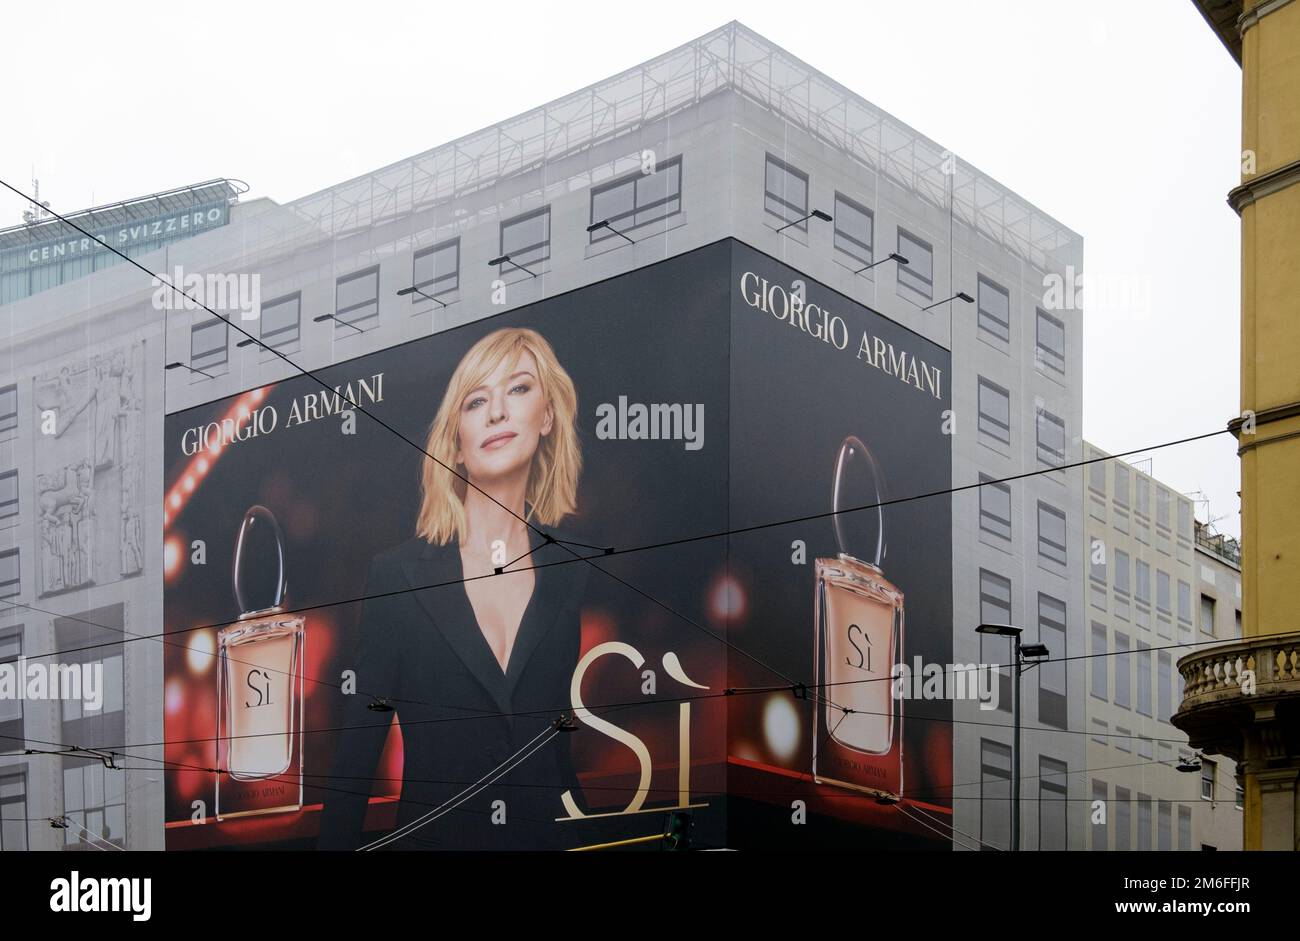 Big advertising billboard with Giorgio Armani perfume displayed on the facade of a building in the center of Milano, Italy Stock Photo